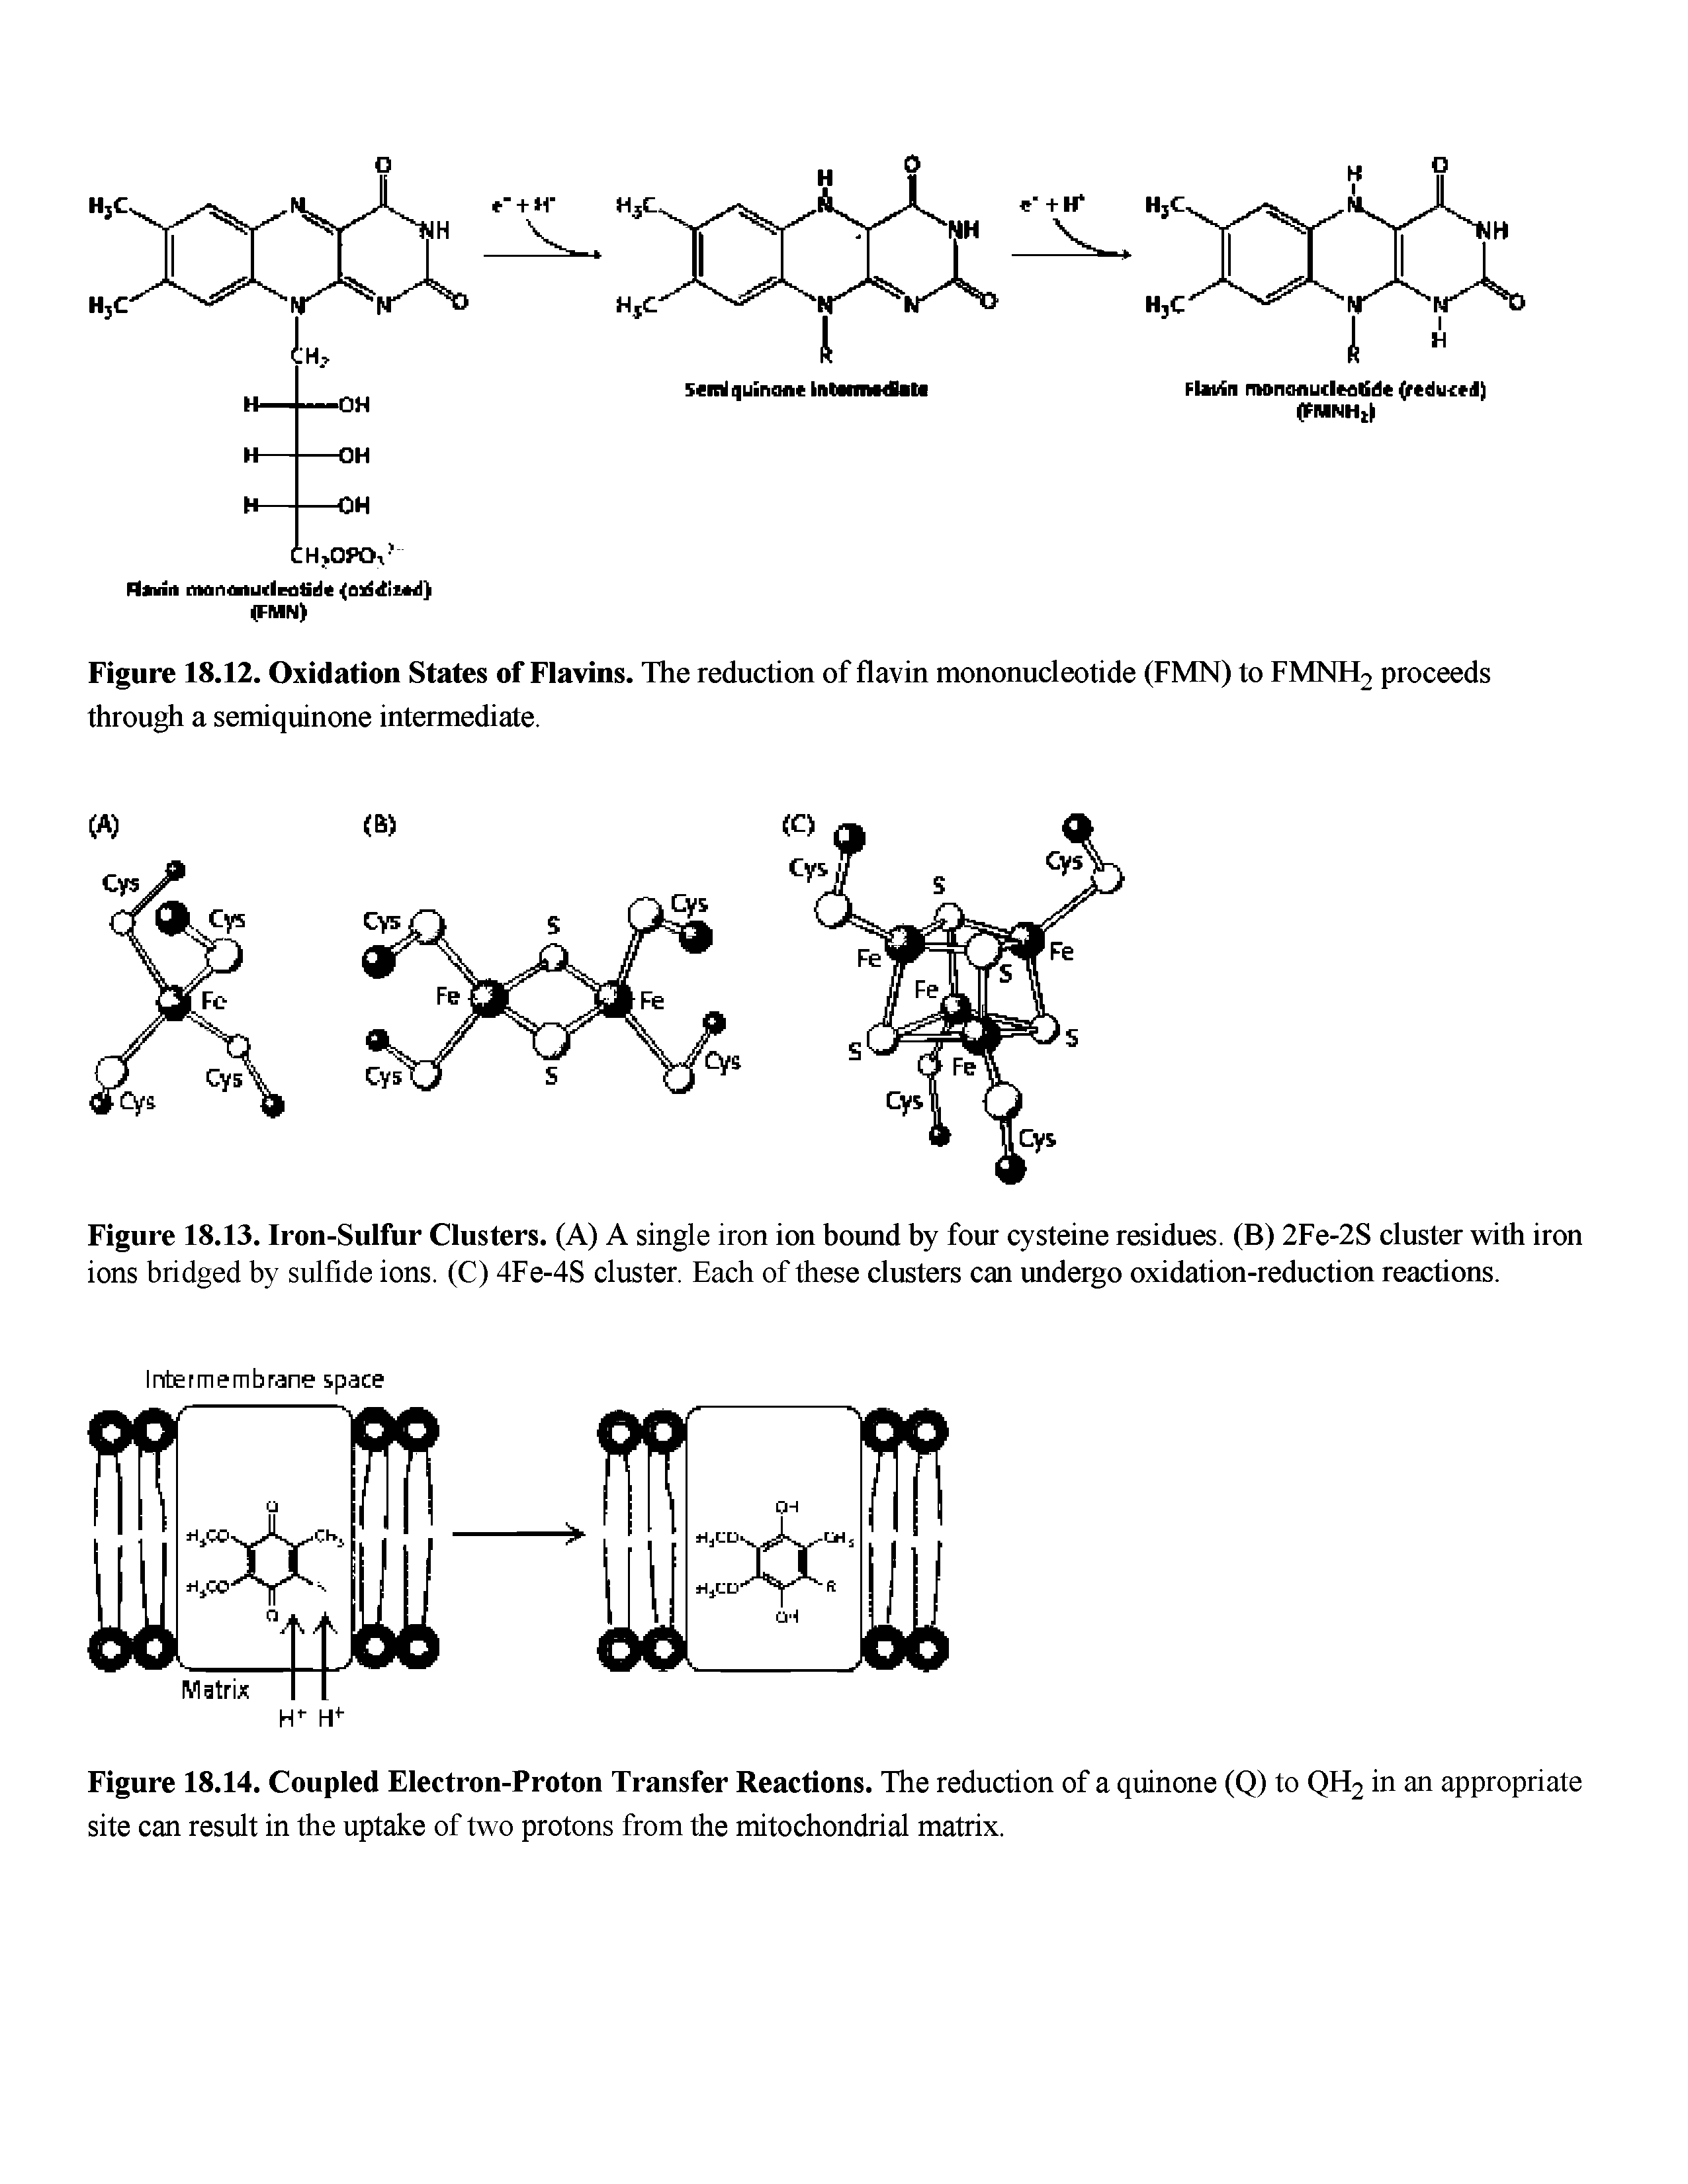 Figure 18.13. Iron-Sulfur Clusters. (A) A single iron ion hound hy four cysteine residues. (B) 2Fe-2S cluster with iron ions bridged by sulfide ions. (C) 4Fe-4S cluster. Each of these clusters can undergo oxidation-reduction reactions.